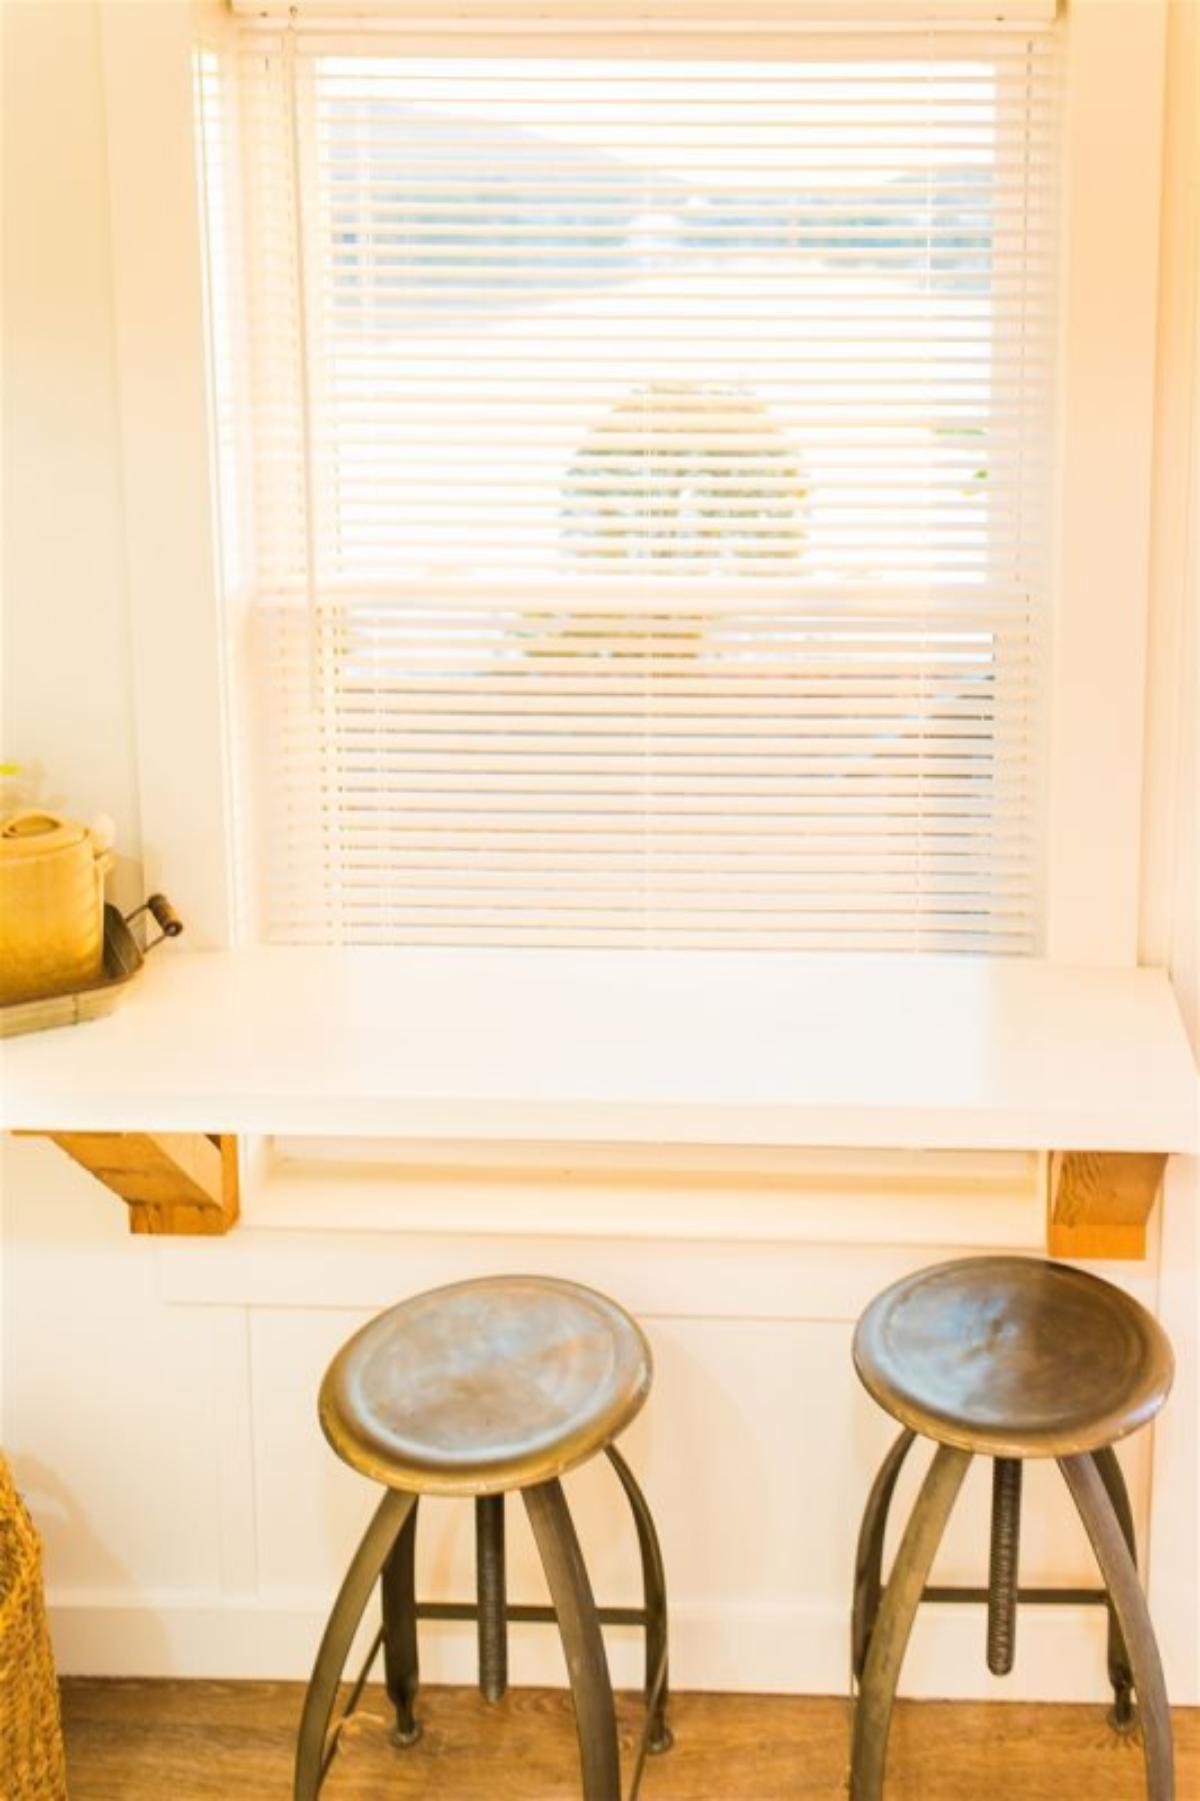 dedicated dining table with stools opposite to the kitchen area